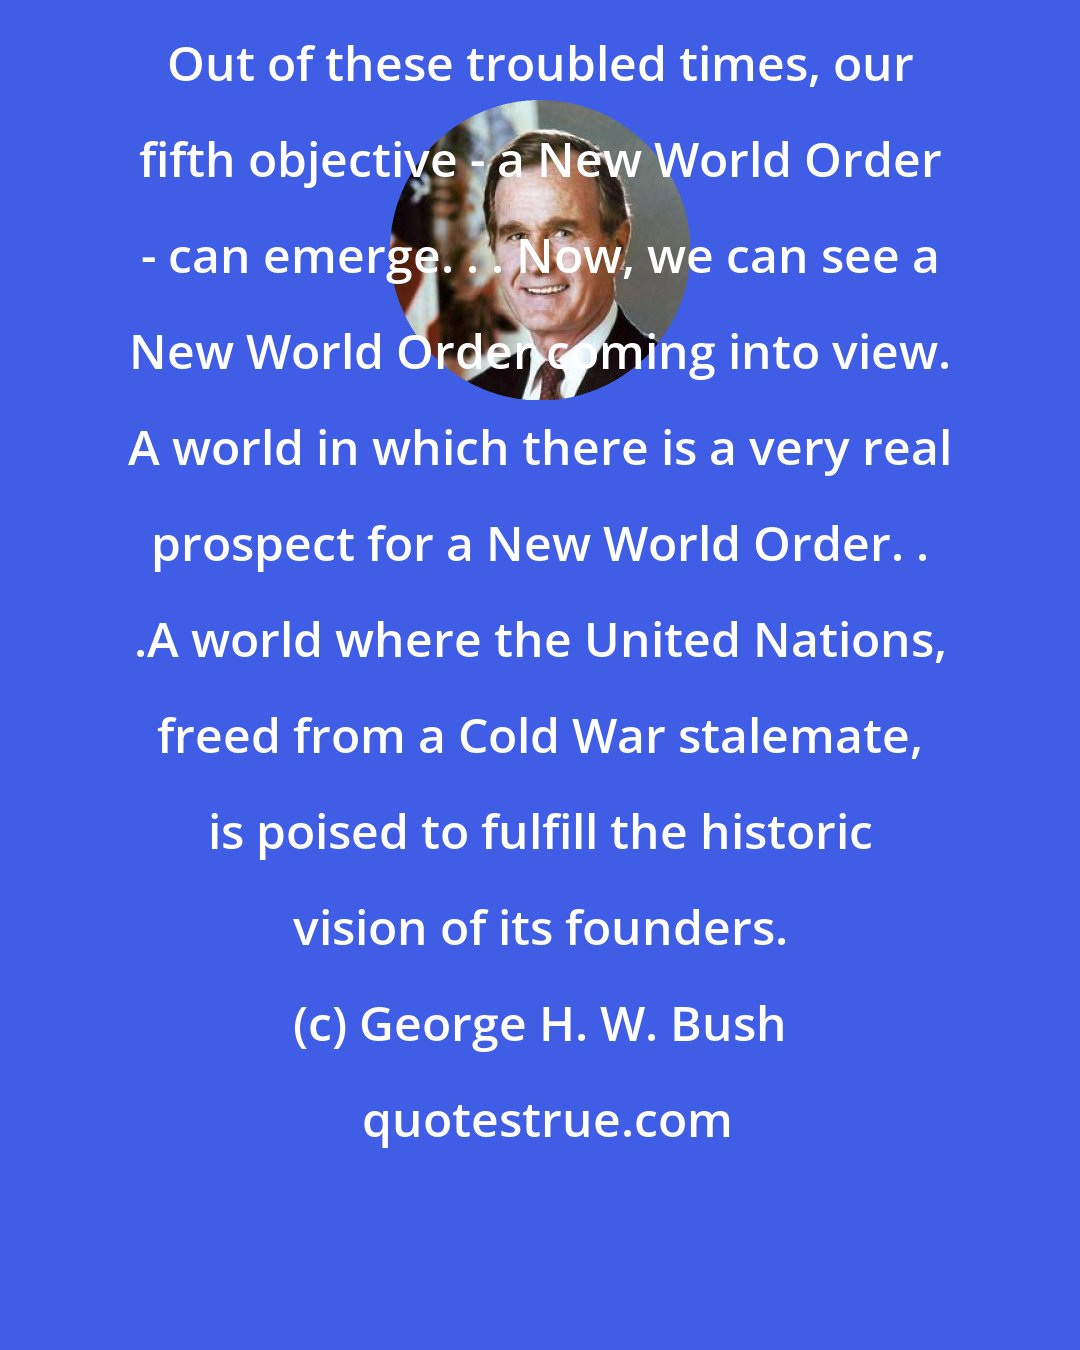 George H. W. Bush: Out of these troubled times, our fifth objective - a New World Order - can emerge. . . Now, we can see a New World Order coming into view. A world in which there is a very real prospect for a New World Order. . .A world where the United Nations, freed from a Cold War stalemate, is poised to fulfill the historic vision of its founders.